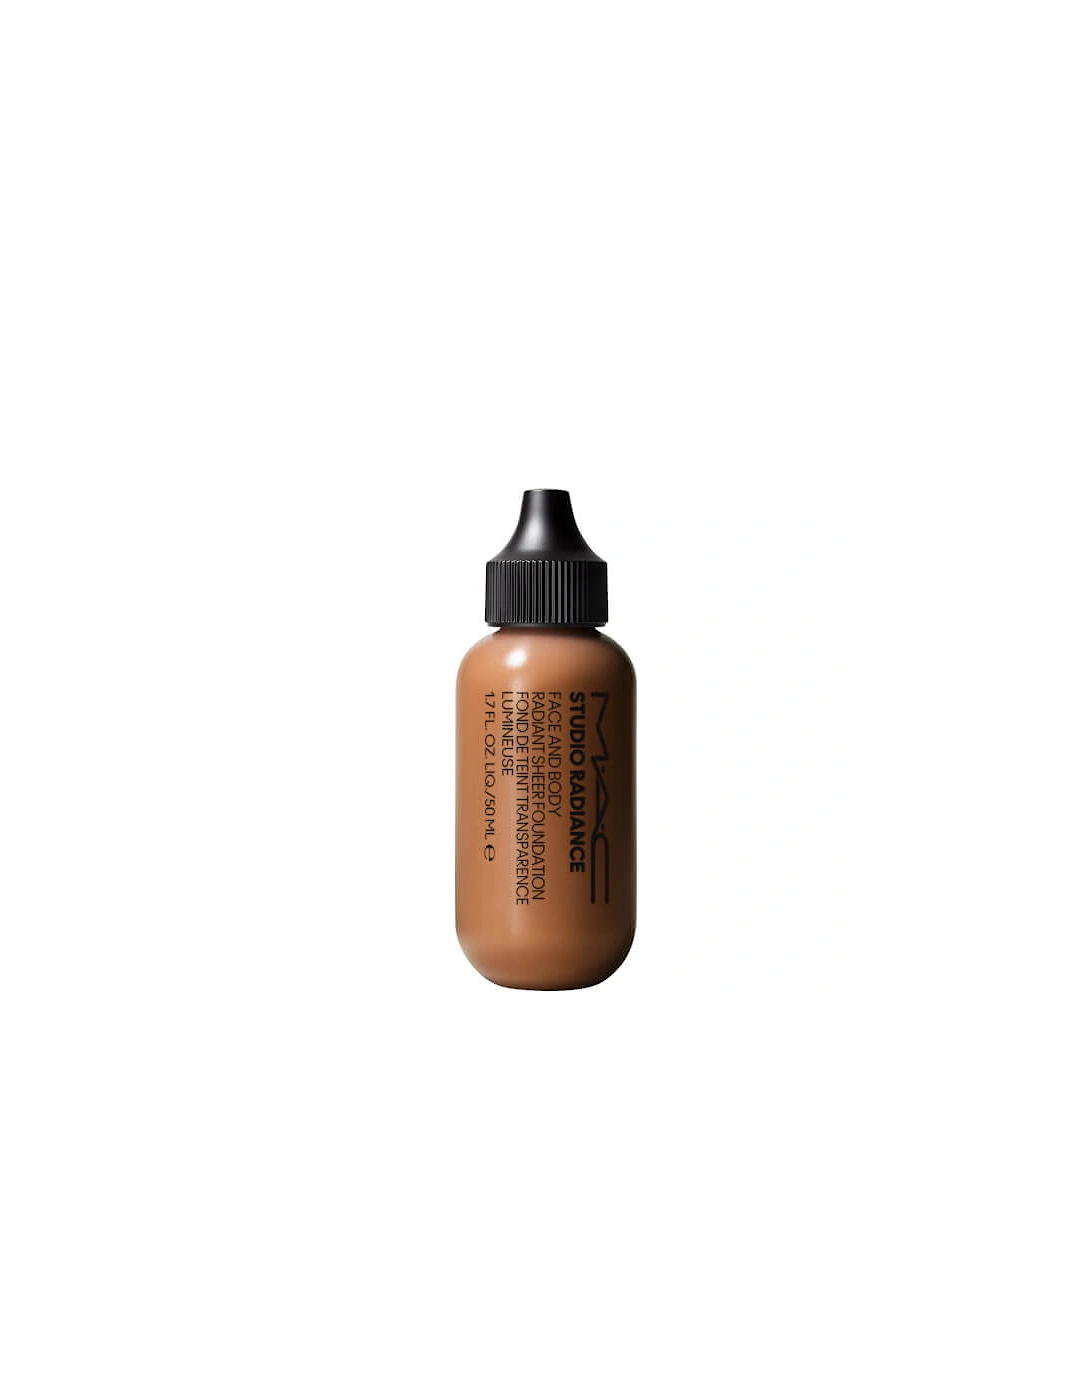 Studio Face and Body Radiant Sheer Foundation - C6, 2 of 1